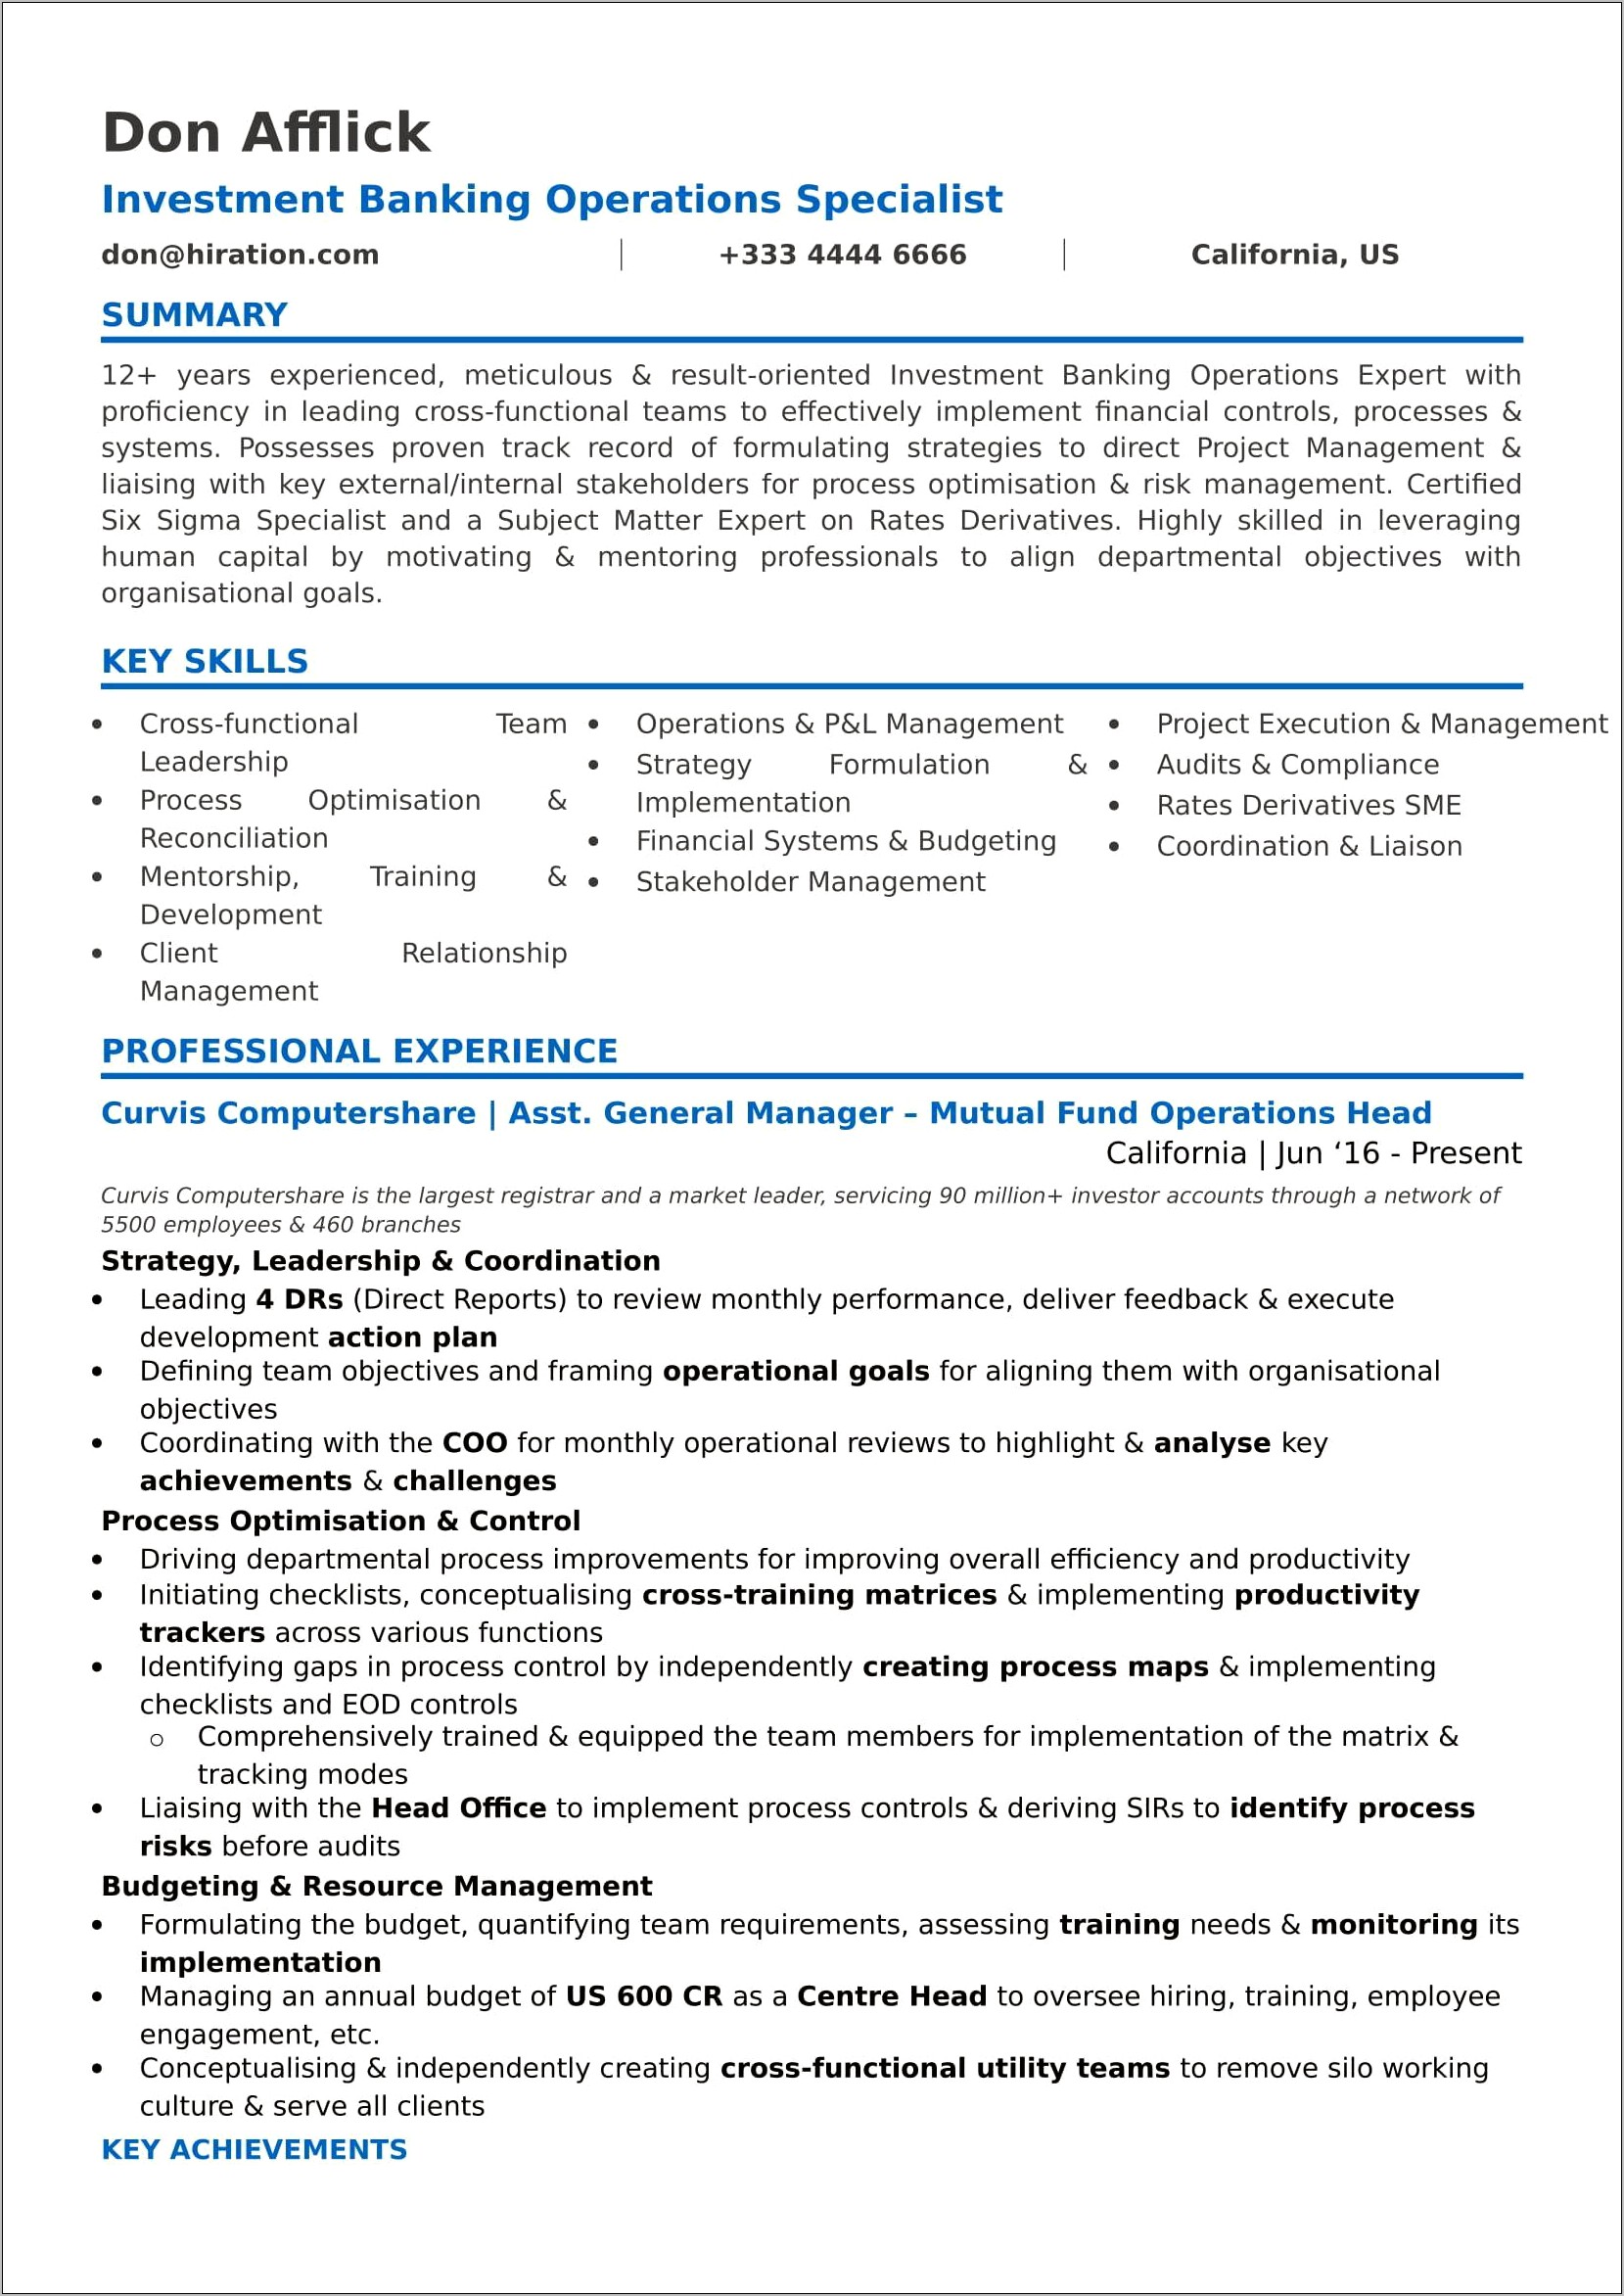 Multiple Careers In Resume Objective